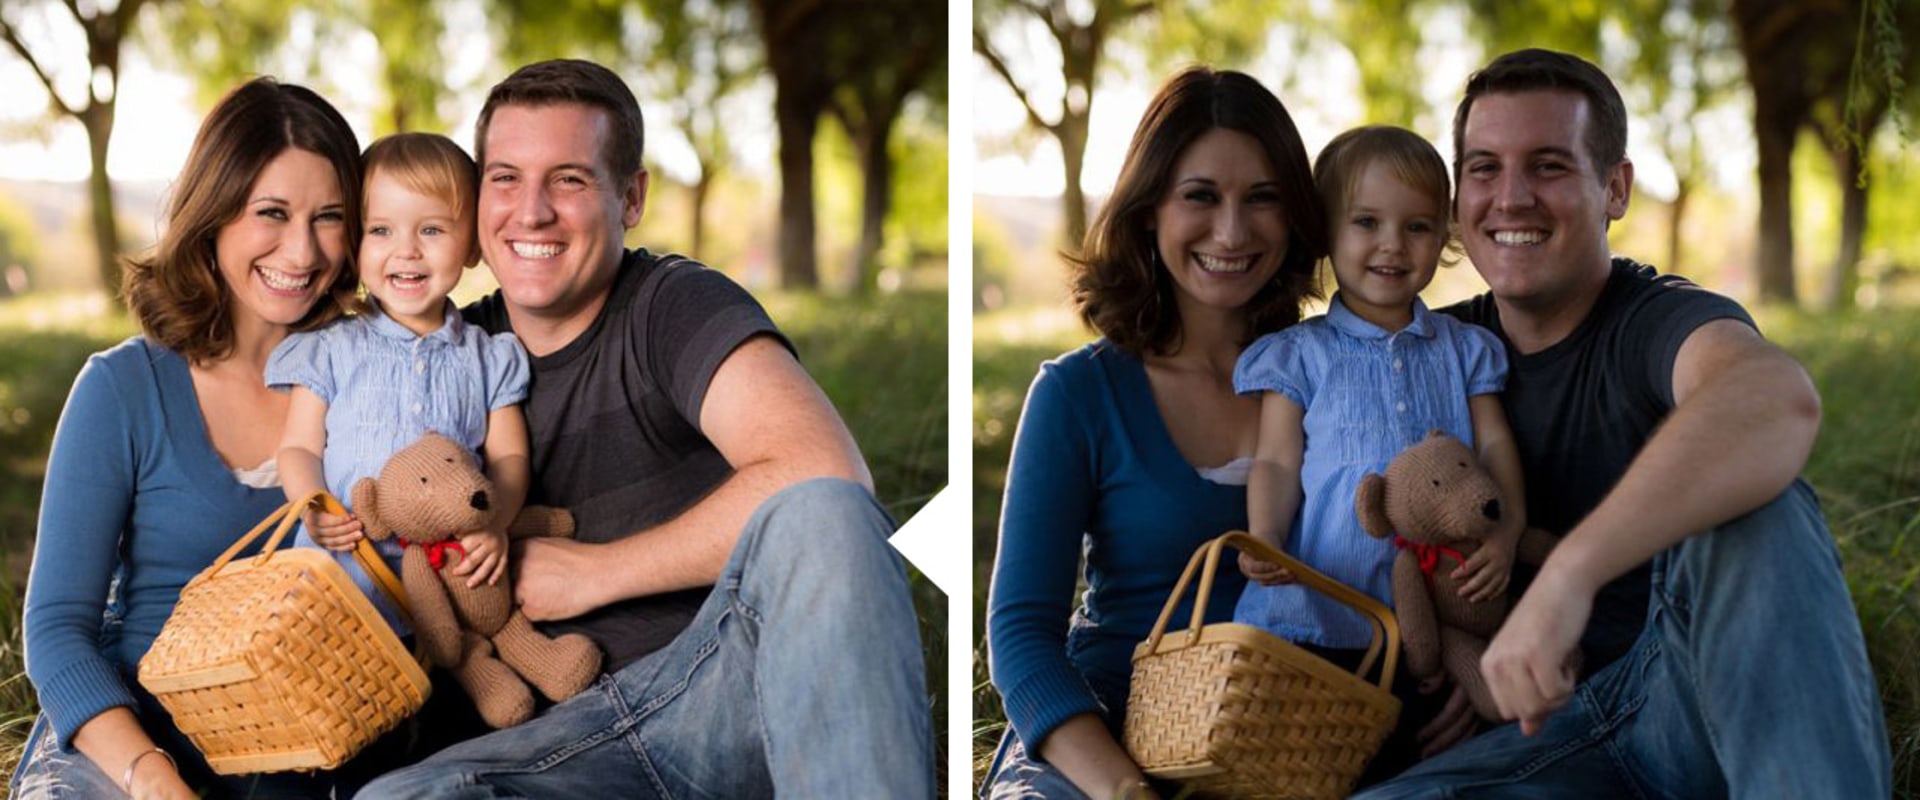 Lighting Techniques for Family Photos